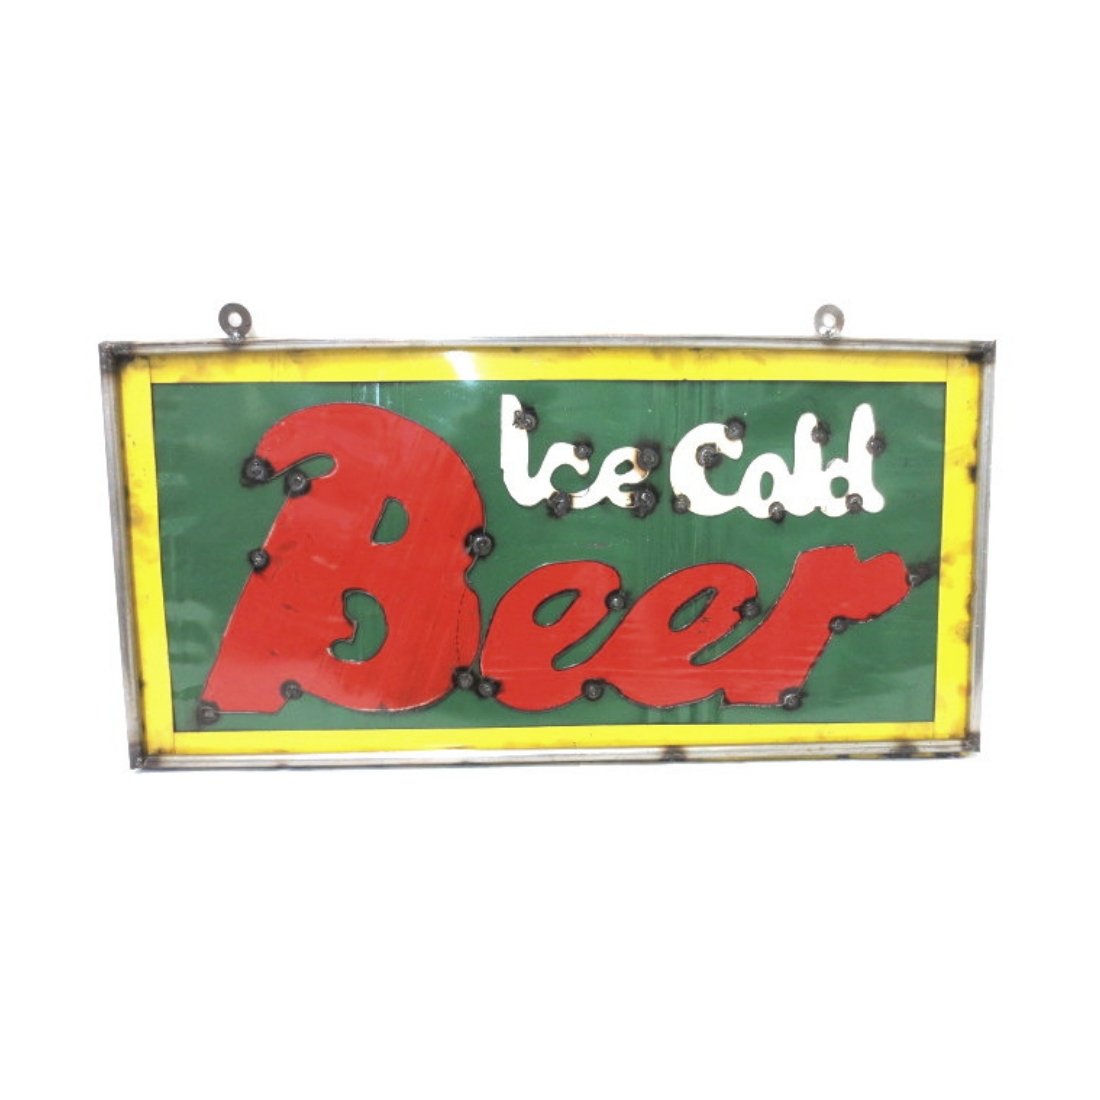 10050 Ice Cold Beer With Frame Sign